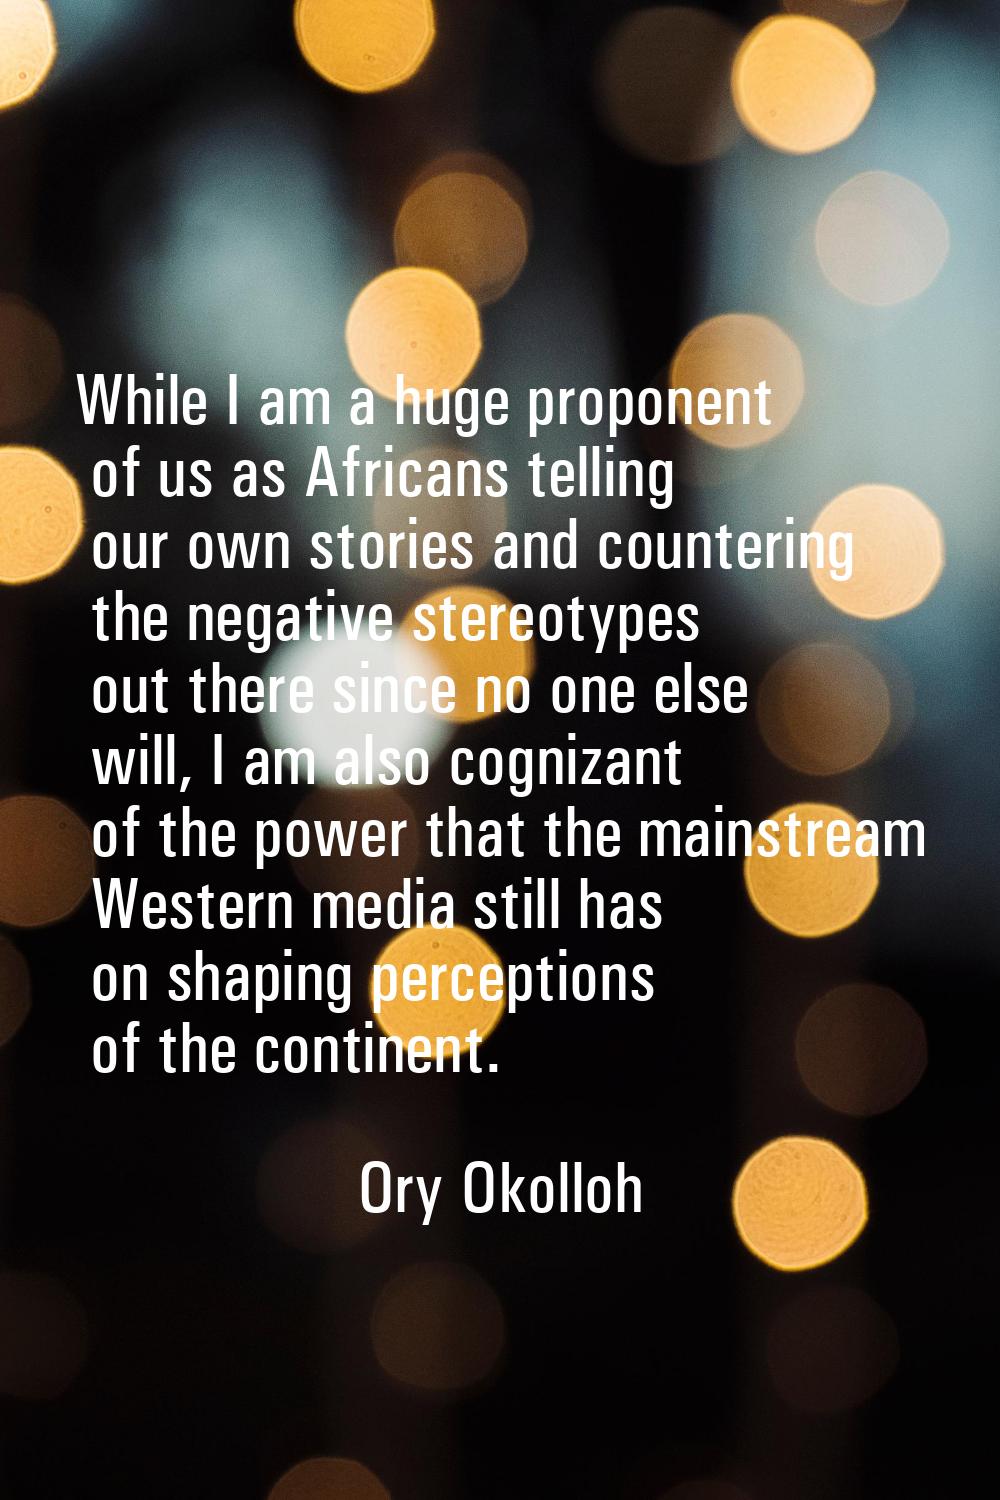 While I am a huge proponent of us as Africans telling our own stories and countering the negative s